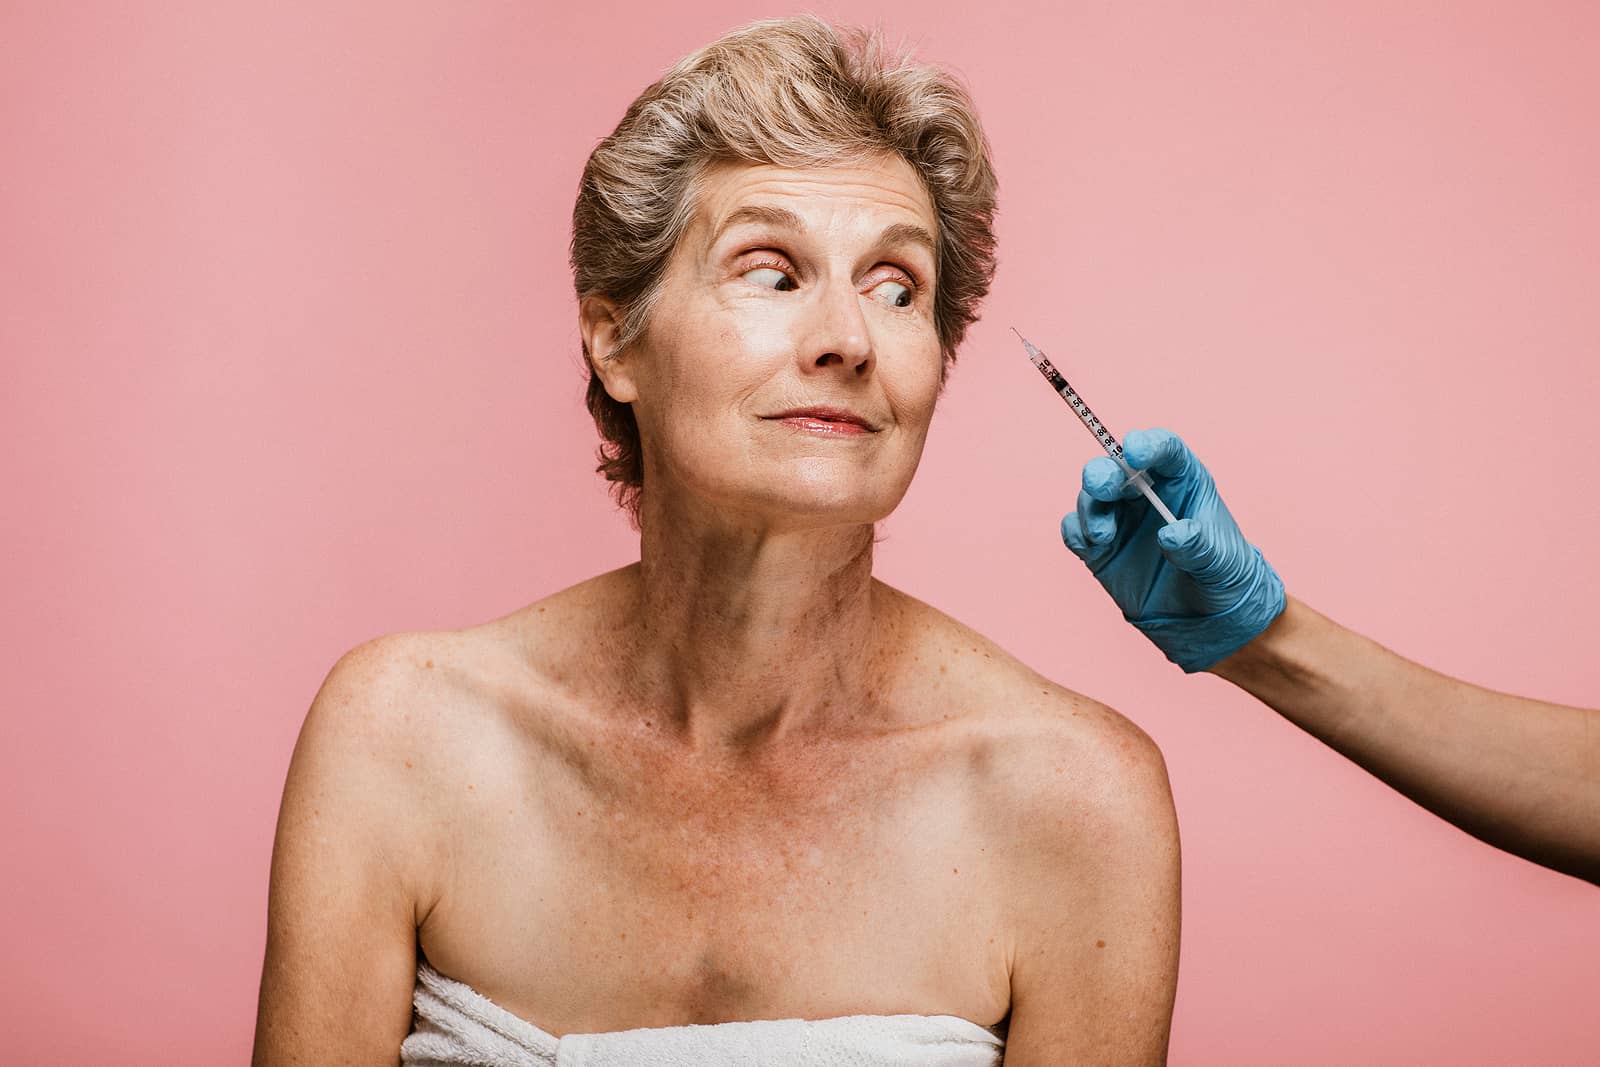 Medicare Coverage for Non-Cosmetic Botox Usages